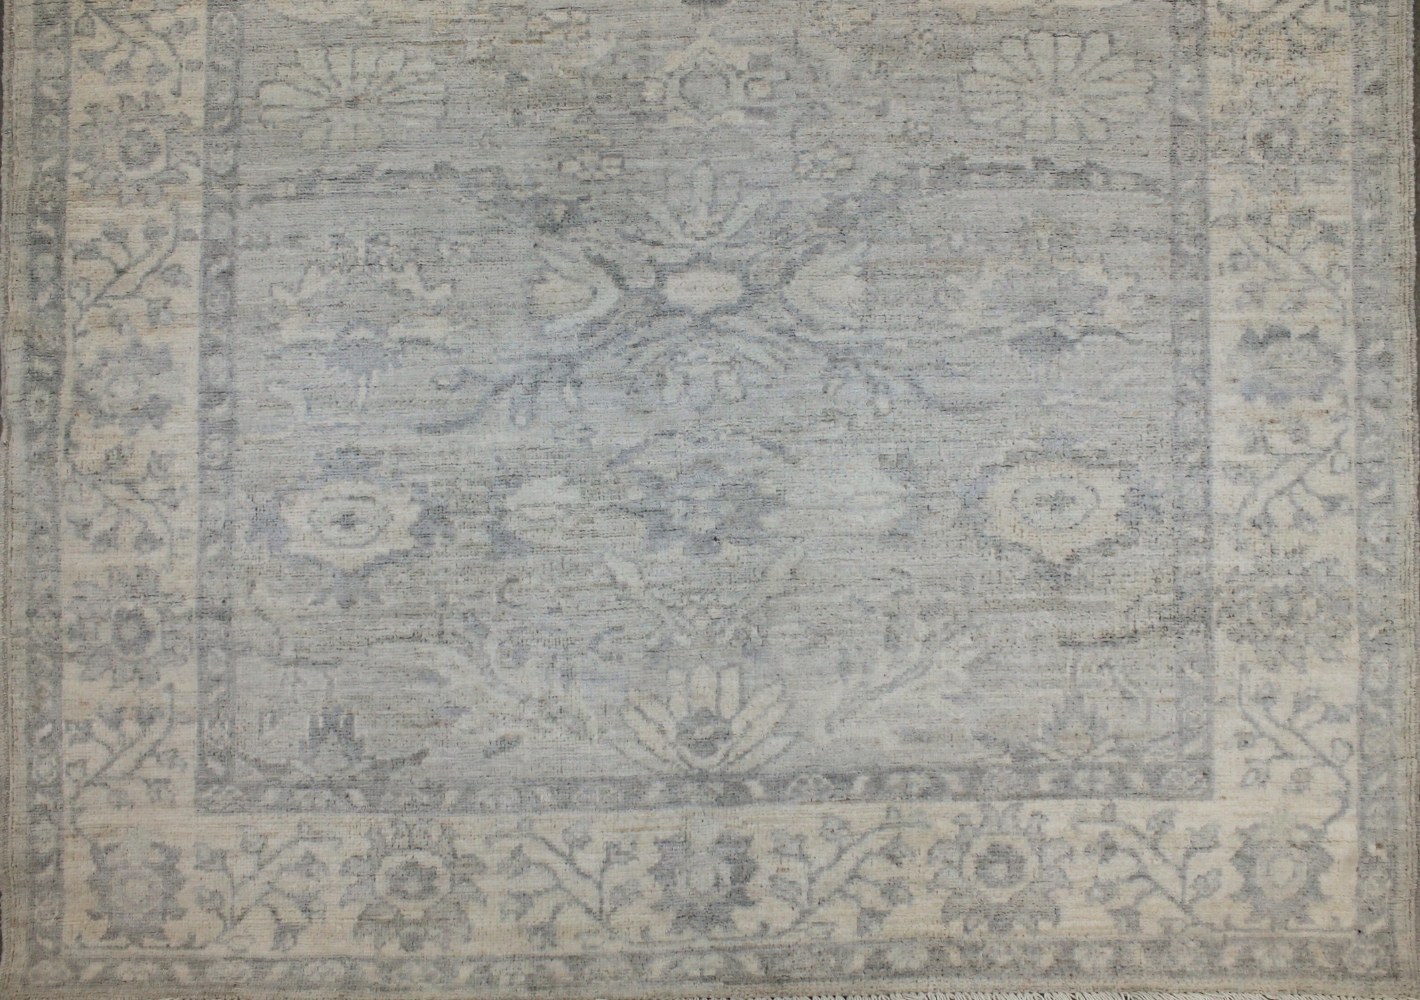 Wide Runner Aryana & Antique Revivals Hand Knotted Wool Area Rug - MR028825